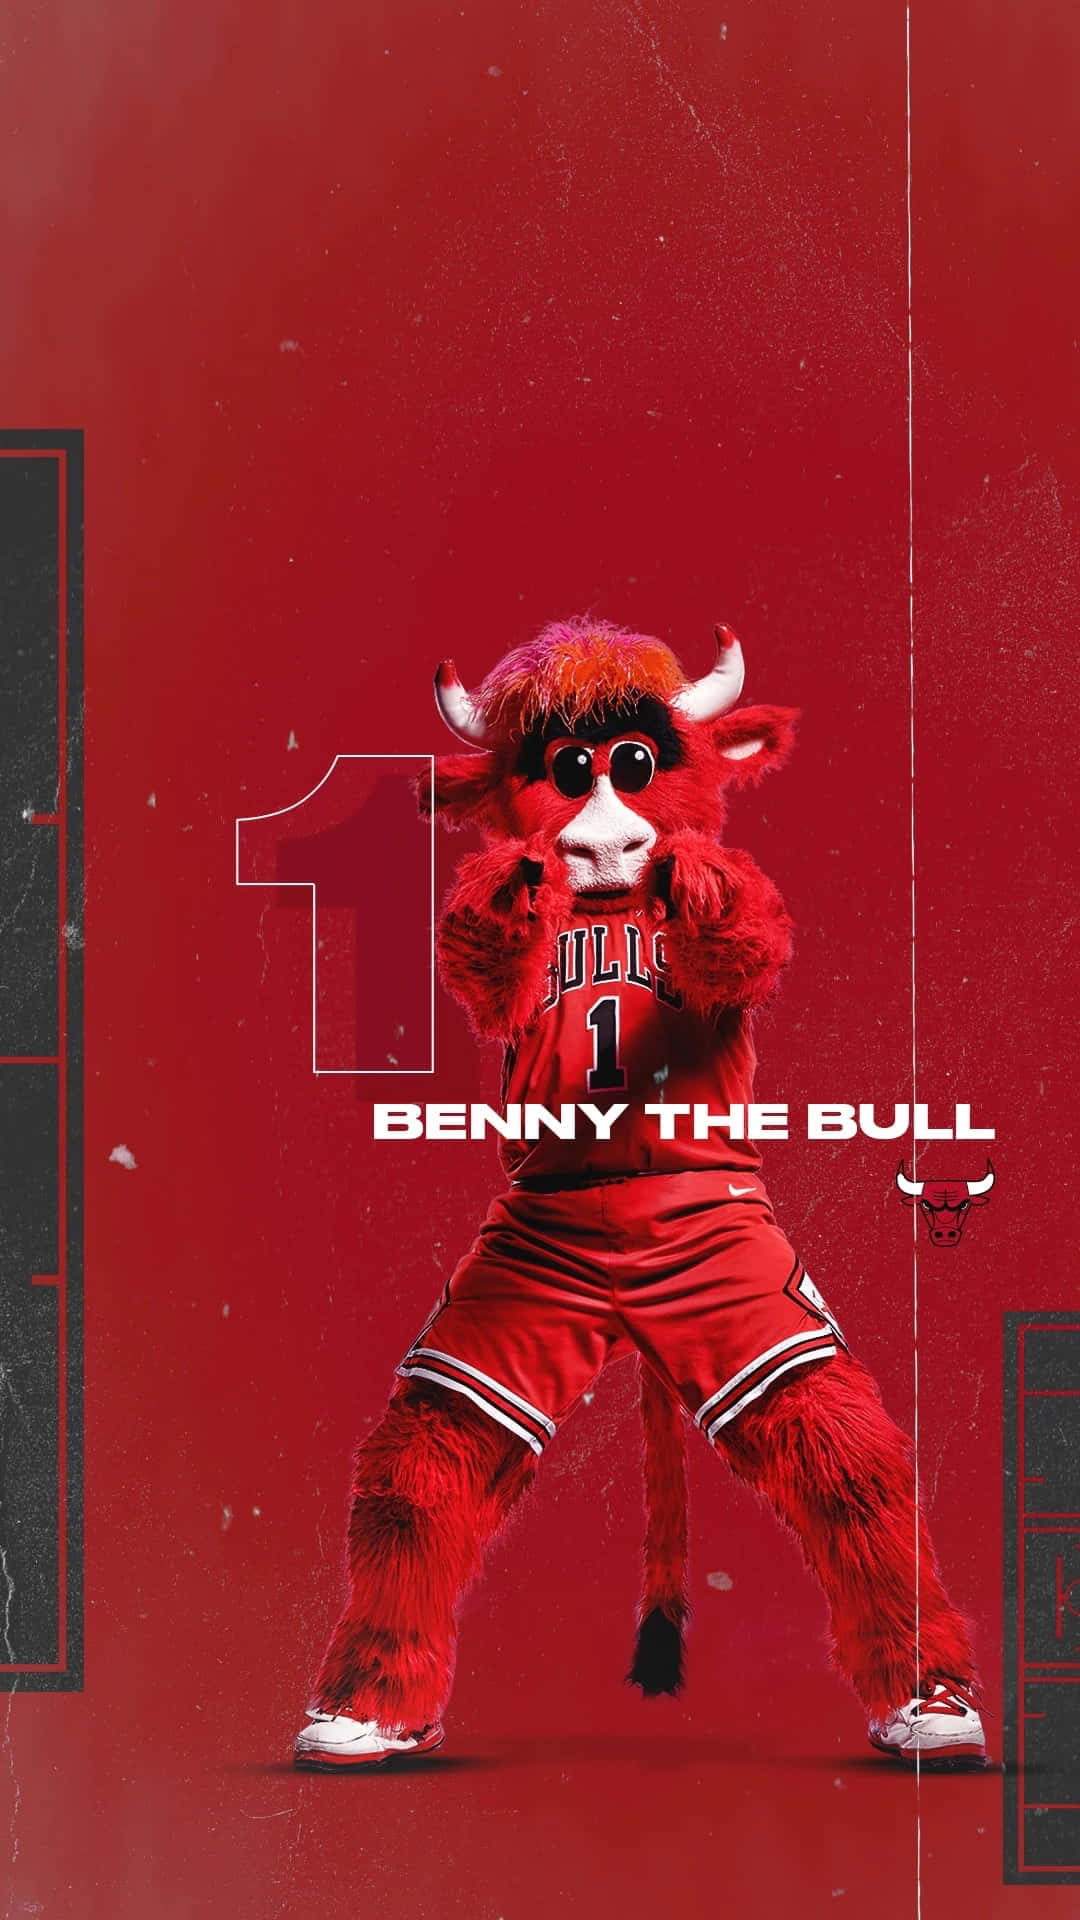 Show Your Team Spirit With A Chicago Bulls Iphone Wallpaper!